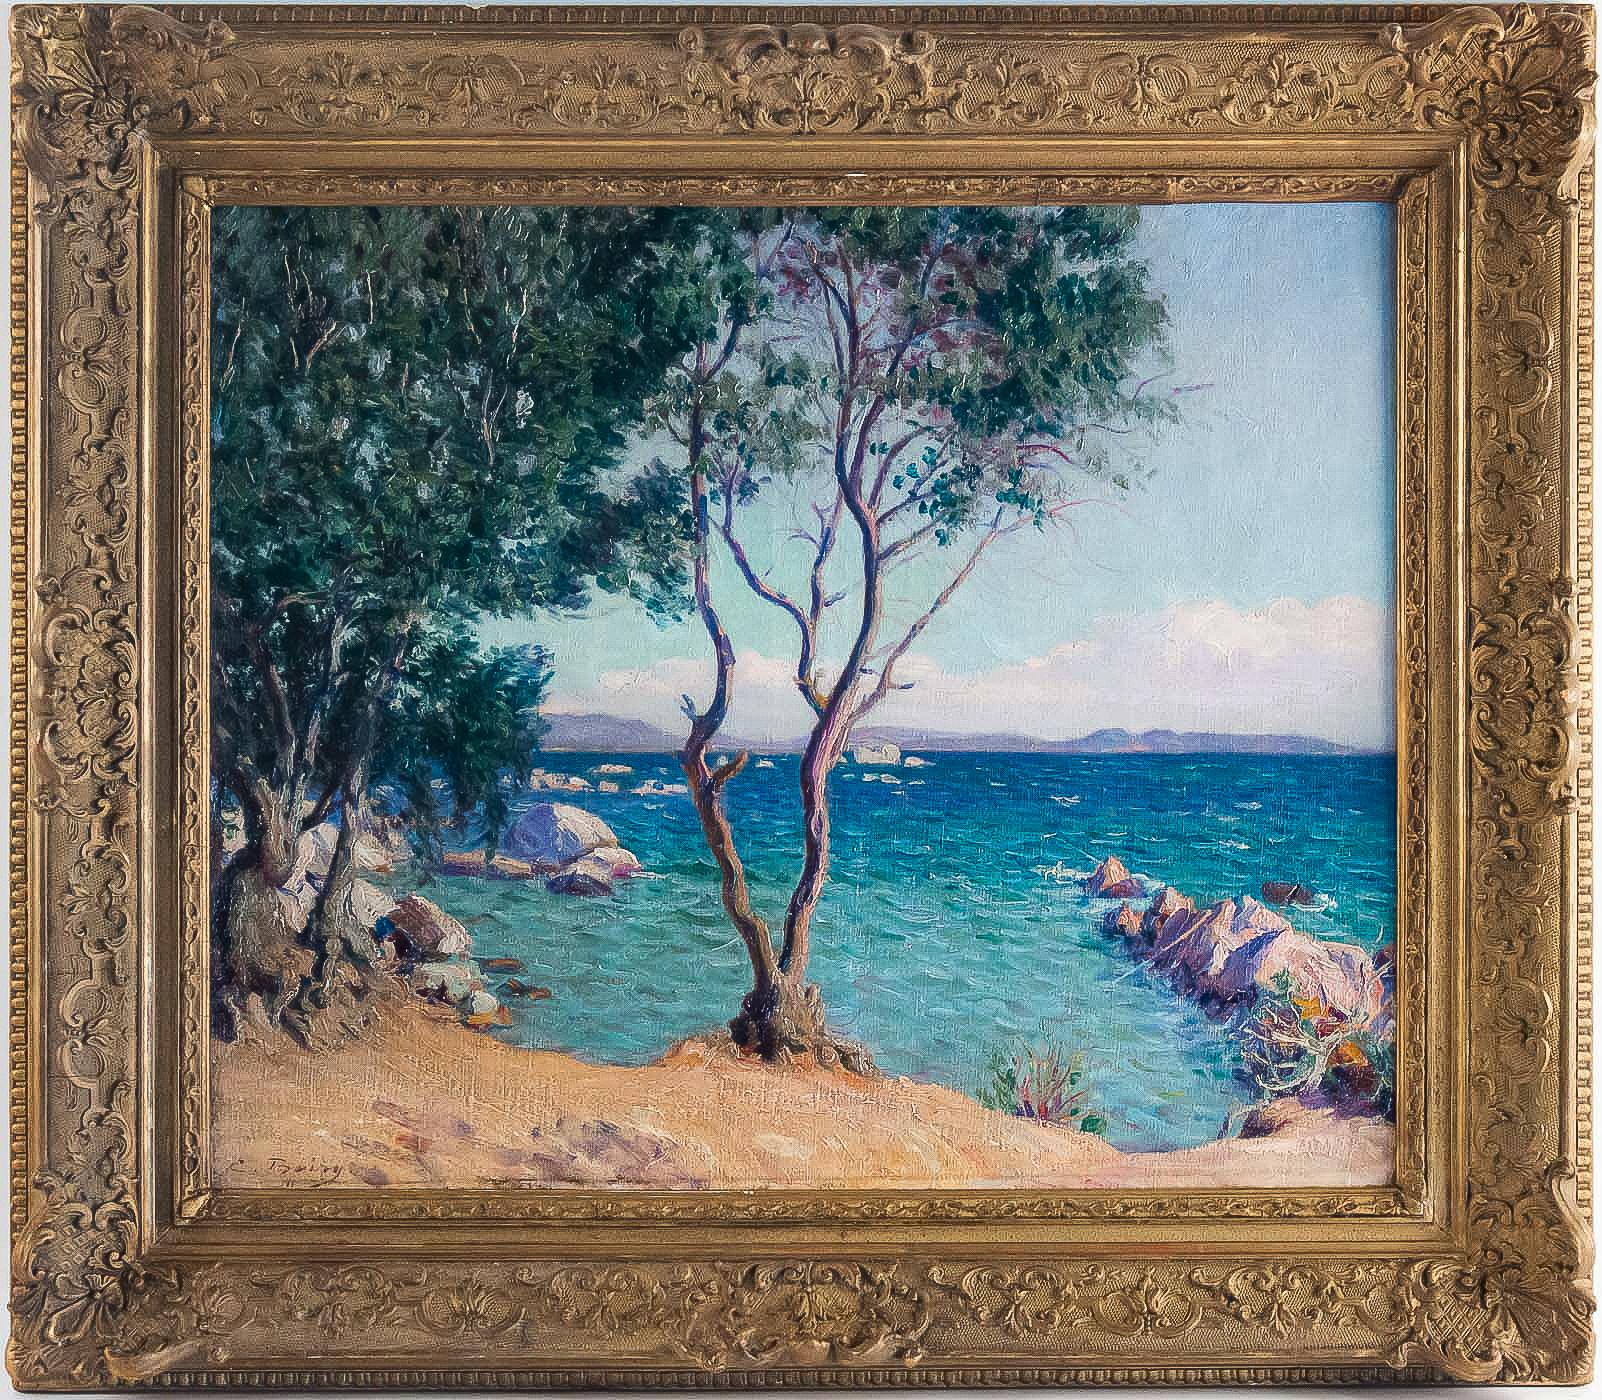 Boiry Camille, oil on canvas Provençal landscape, circa 1920

A beautiful and decorative oil on canvas depicting a Sea View in a Provençal Landscape. Lovely movement and colors on our painting sign on the lower left by Camille Boiry, a famous